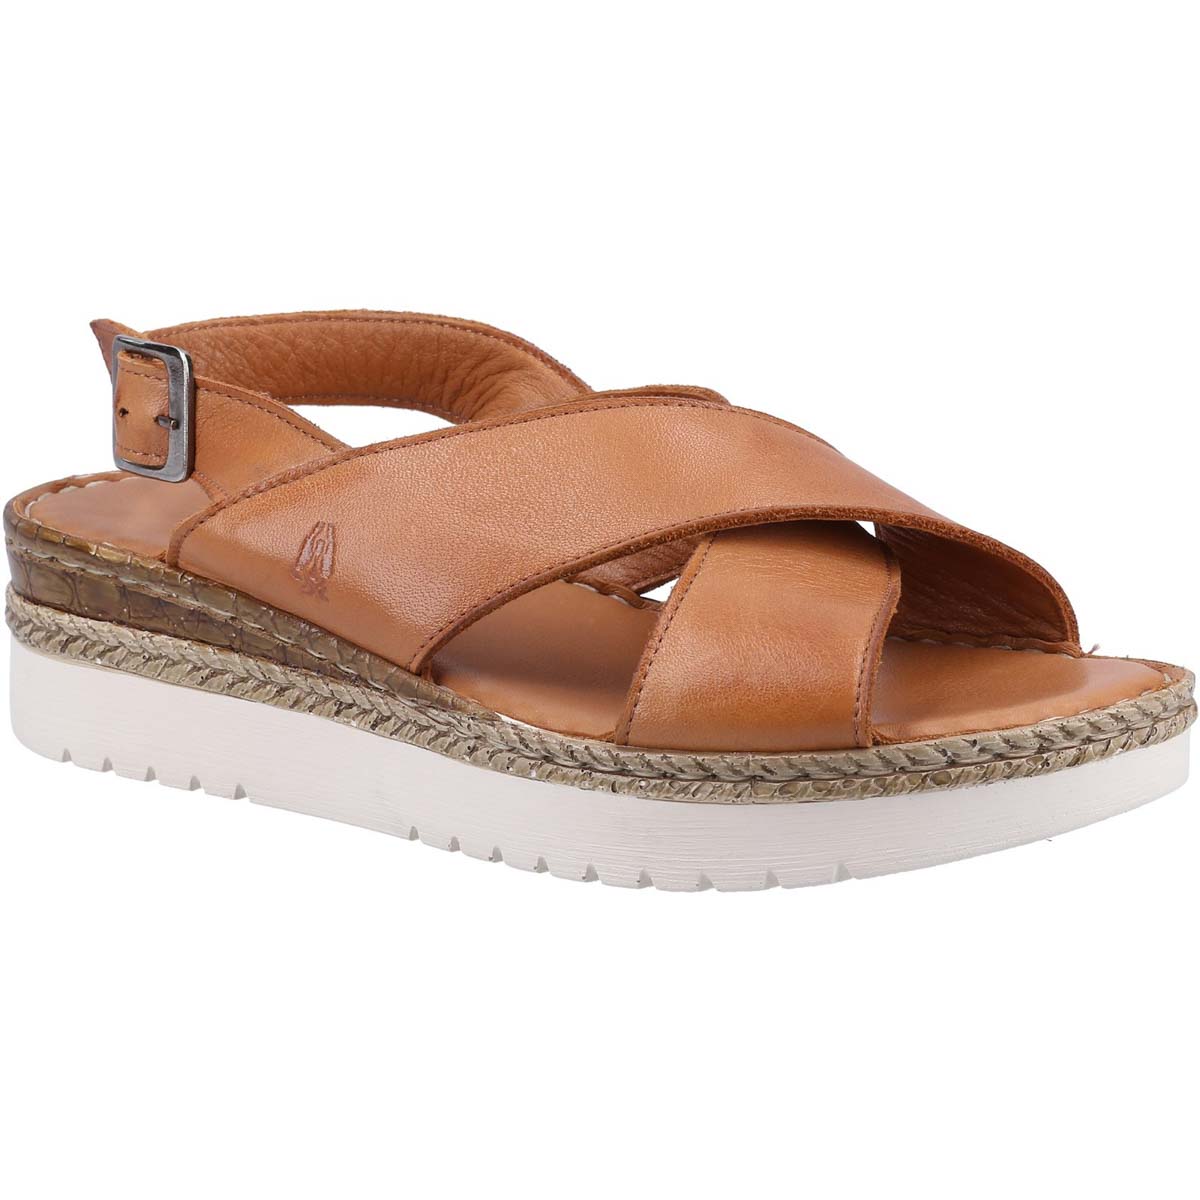 Hush Puppies Saphira Tan Womens Comfortable Sandals 36627-68326 in a Plain Leather in Size 7